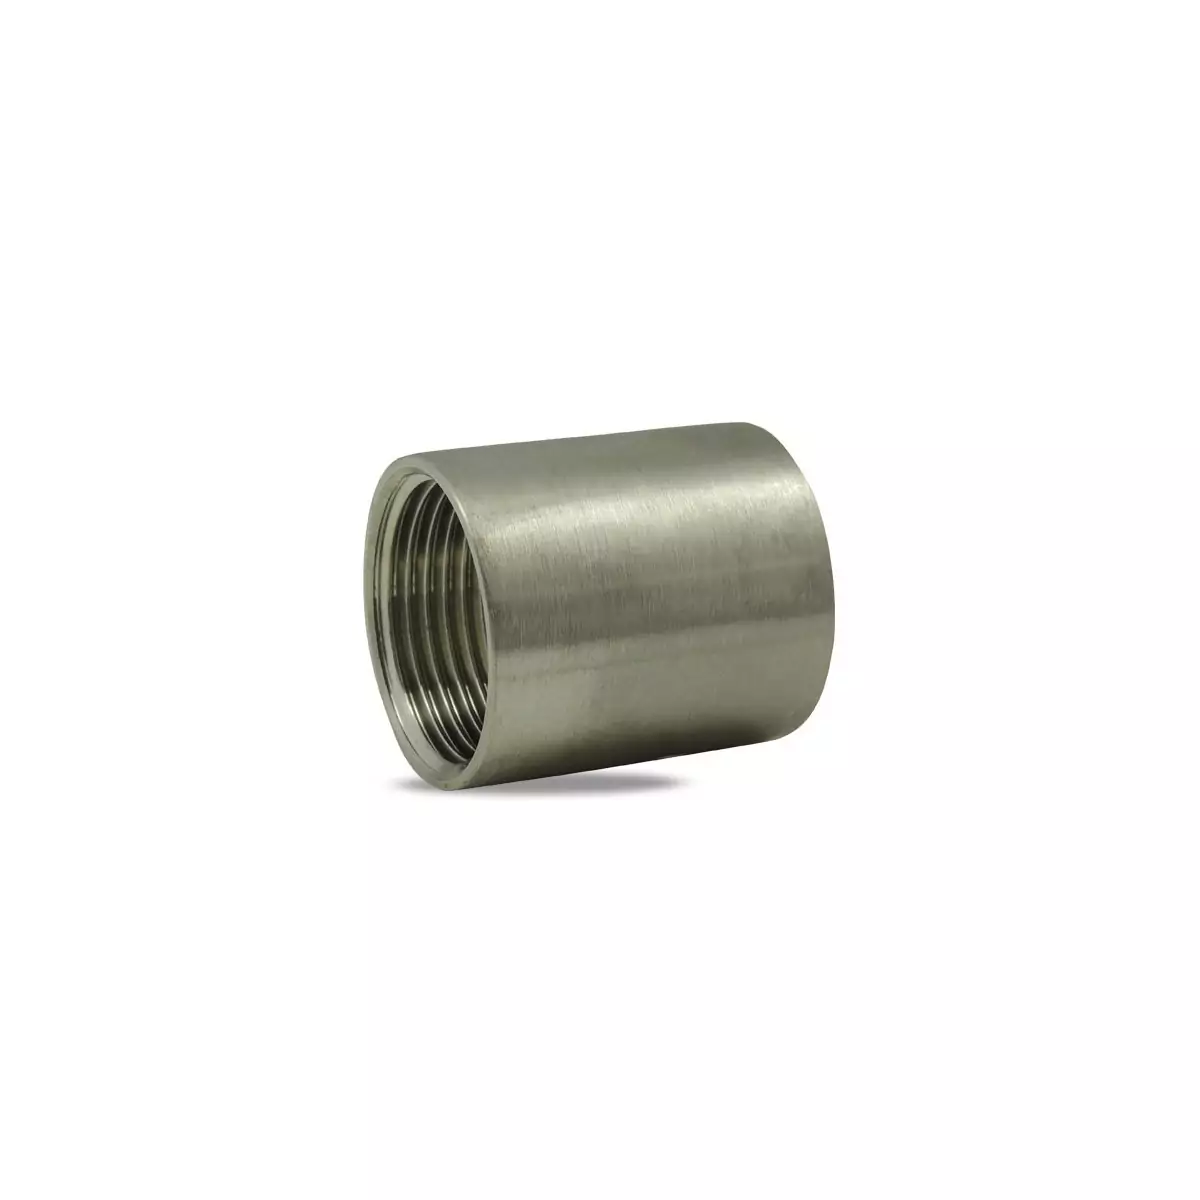 Machined 316 stainless steel sleeve